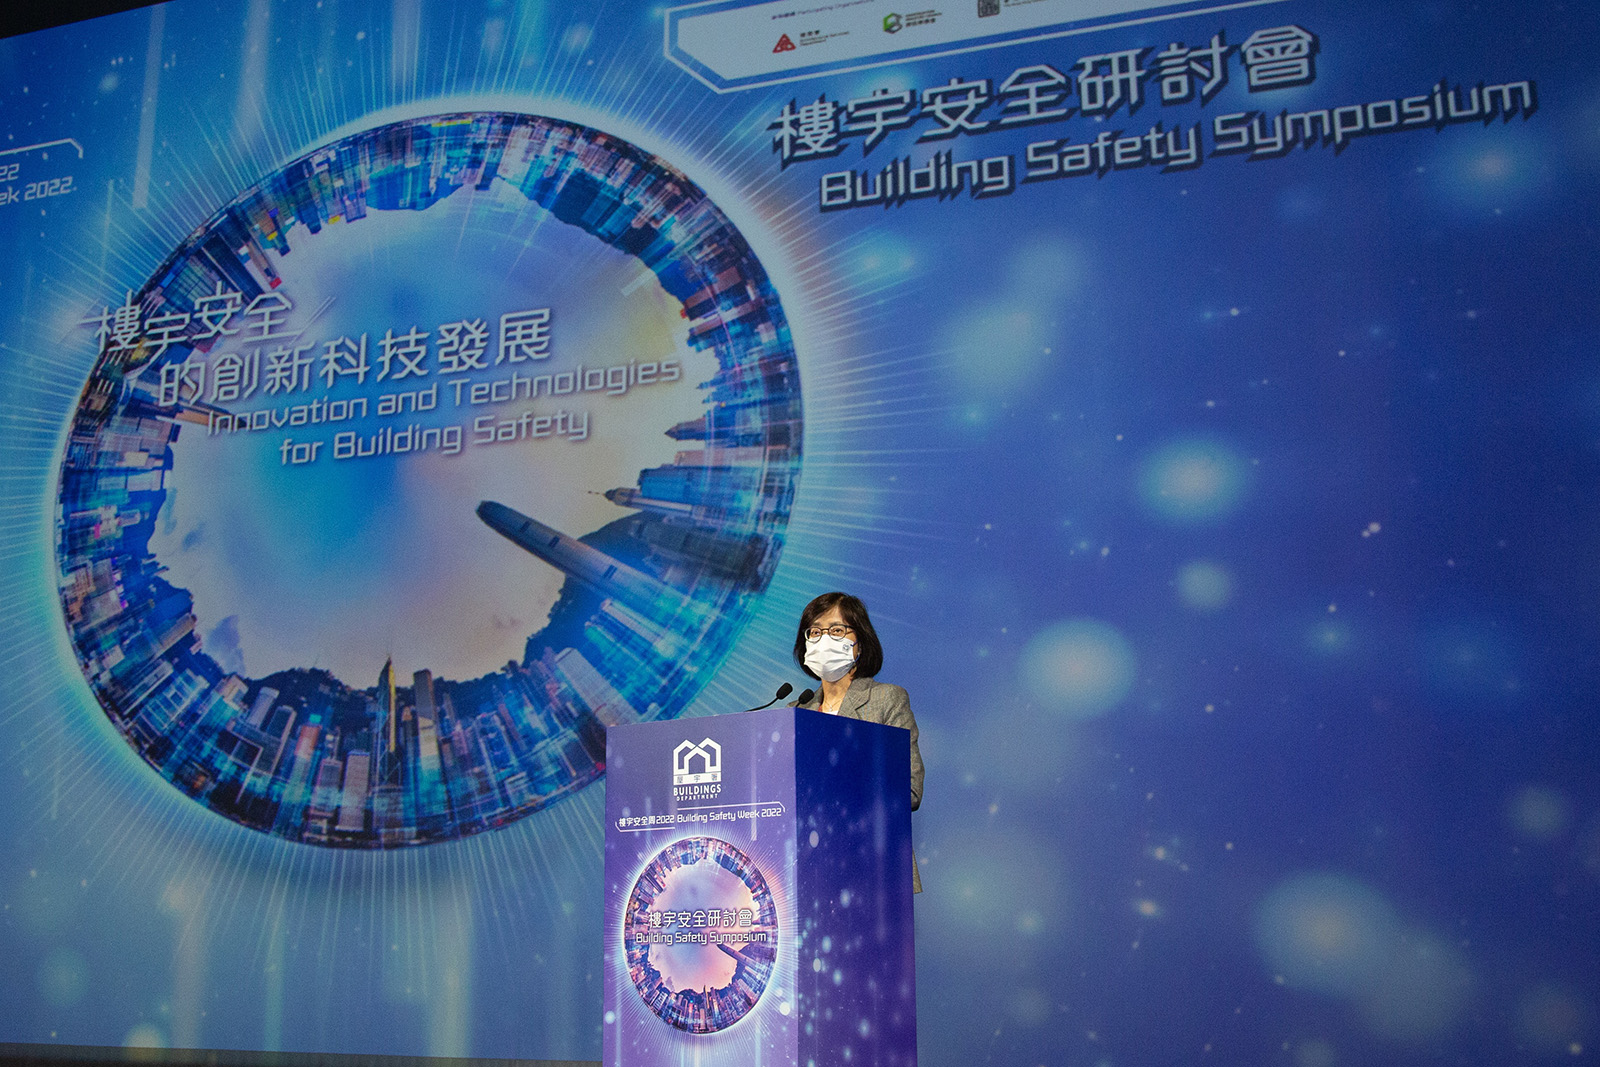 Building Safety Symposium held as finale of Building Safety Week 2022